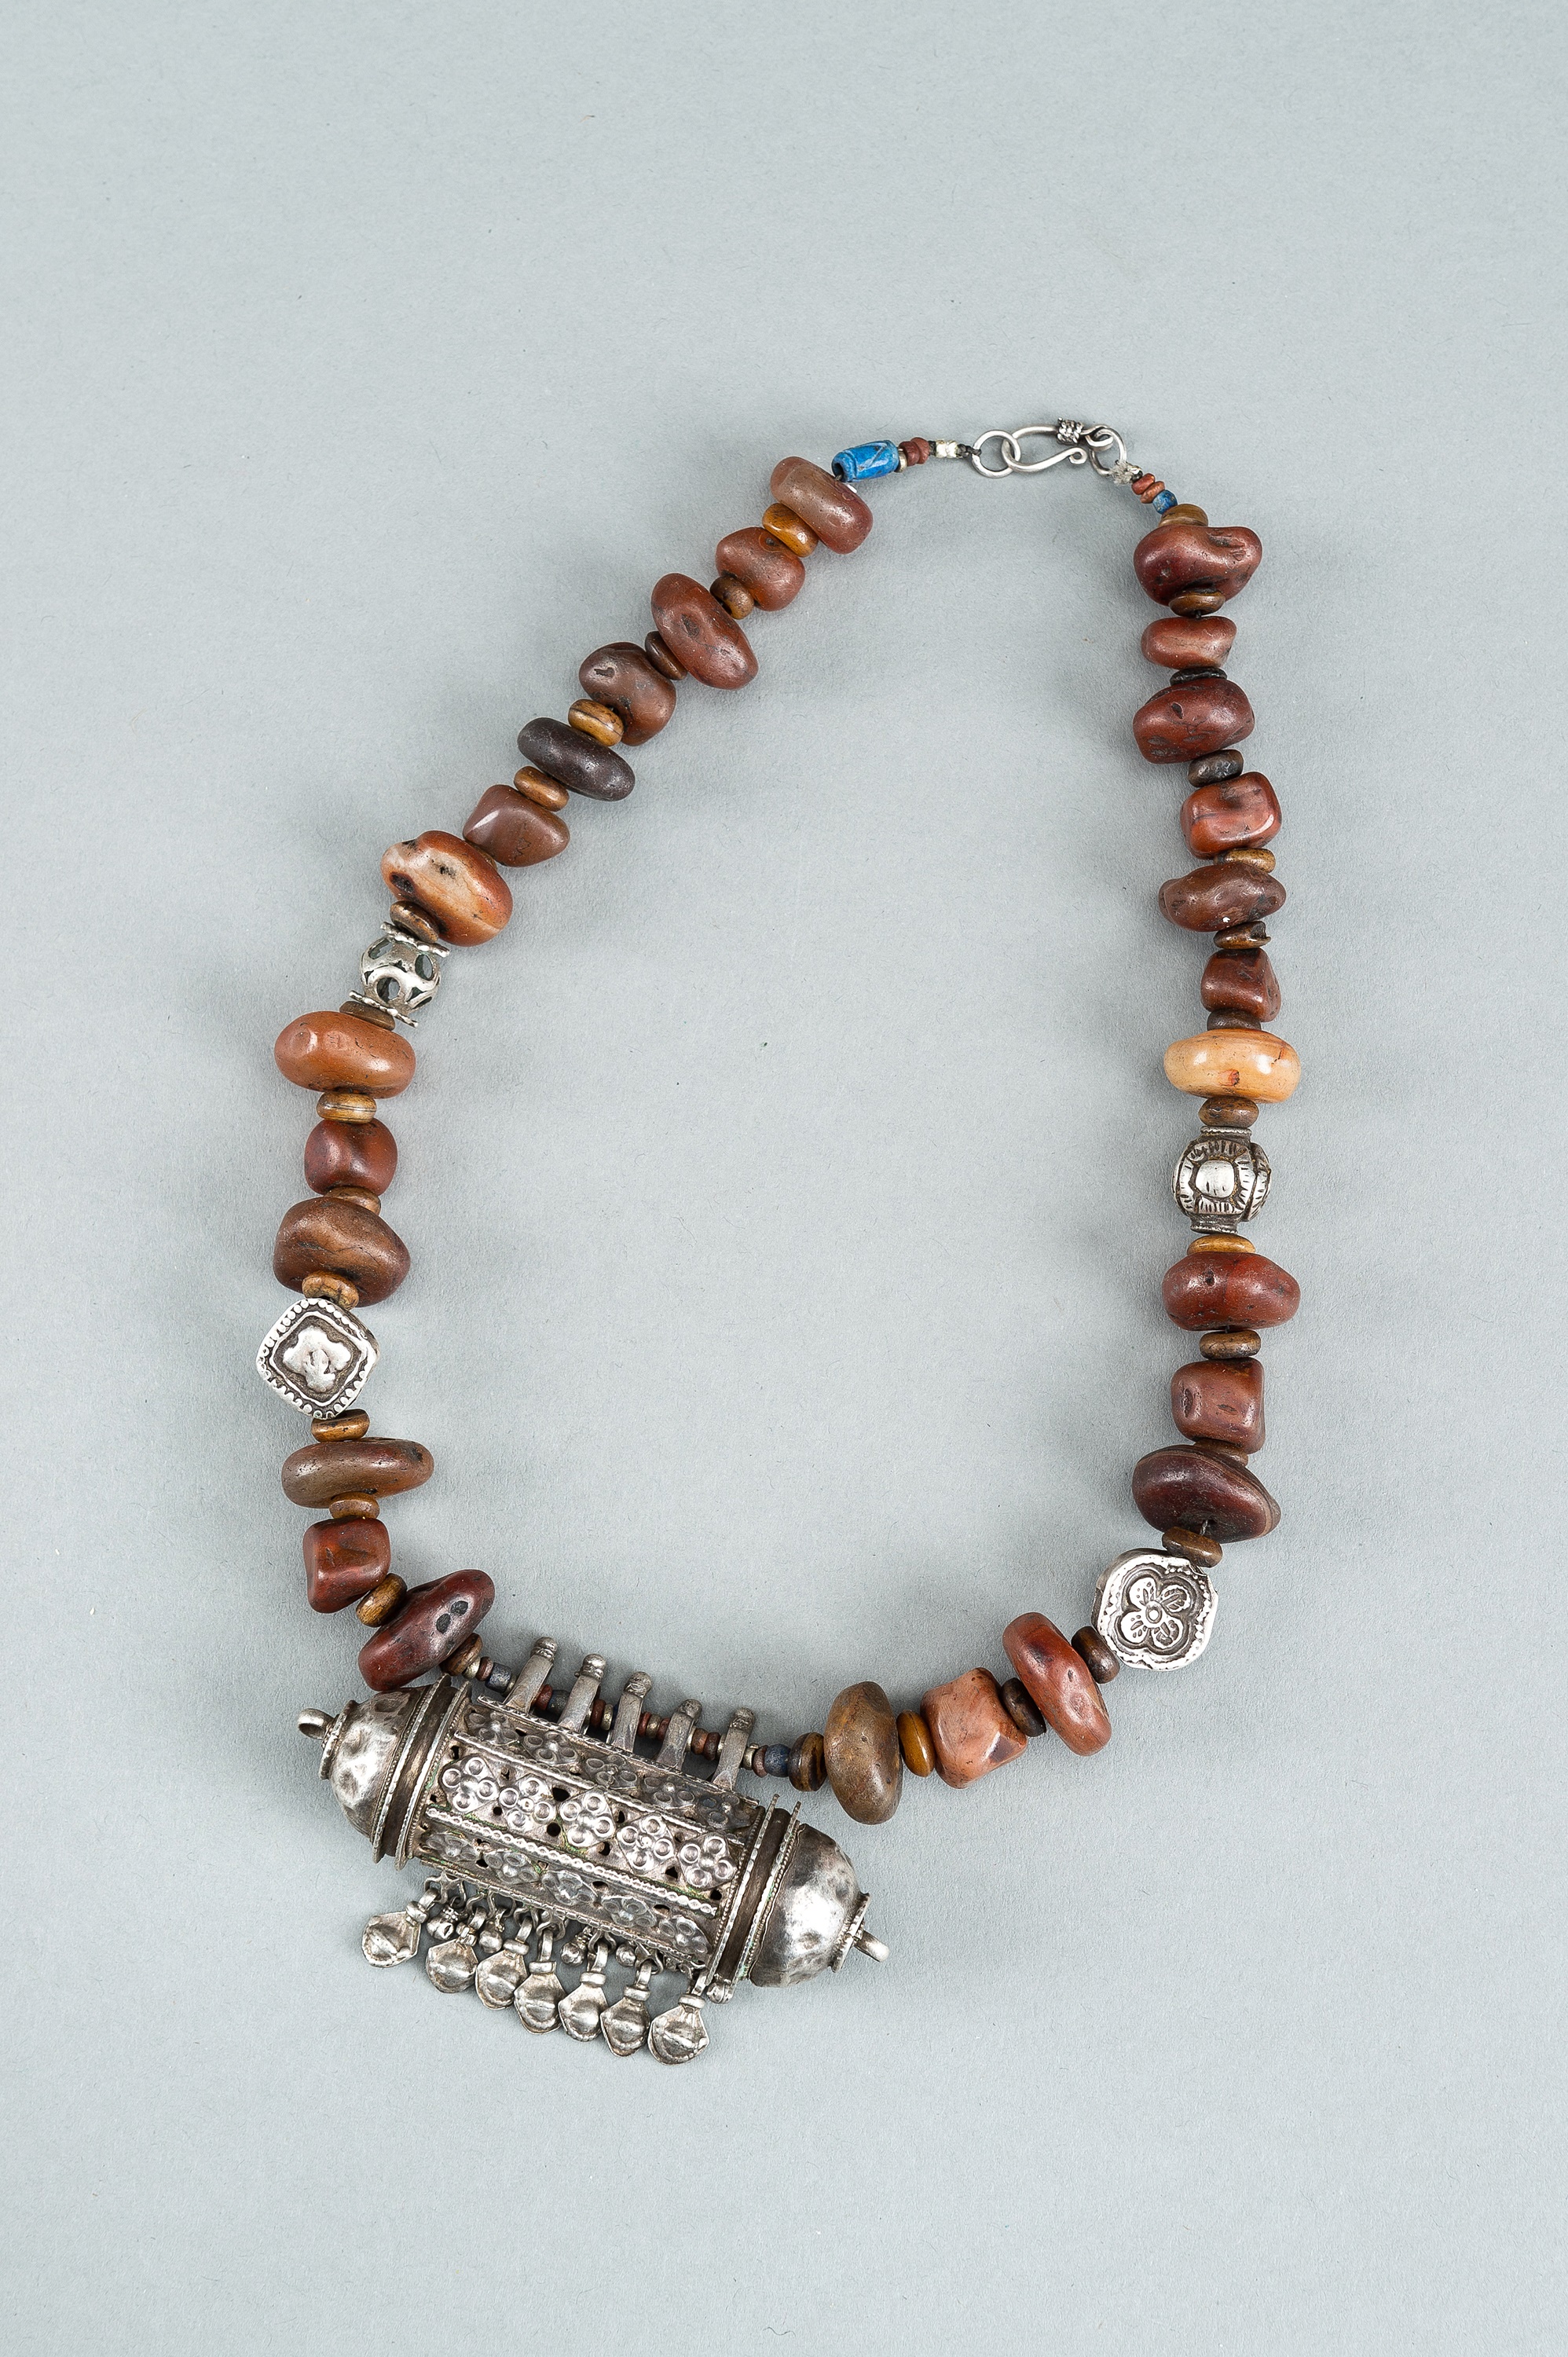 A SILVER AND GLASS AMULET PENDANT NECKLACE, c. 1900s - Image 13 of 13